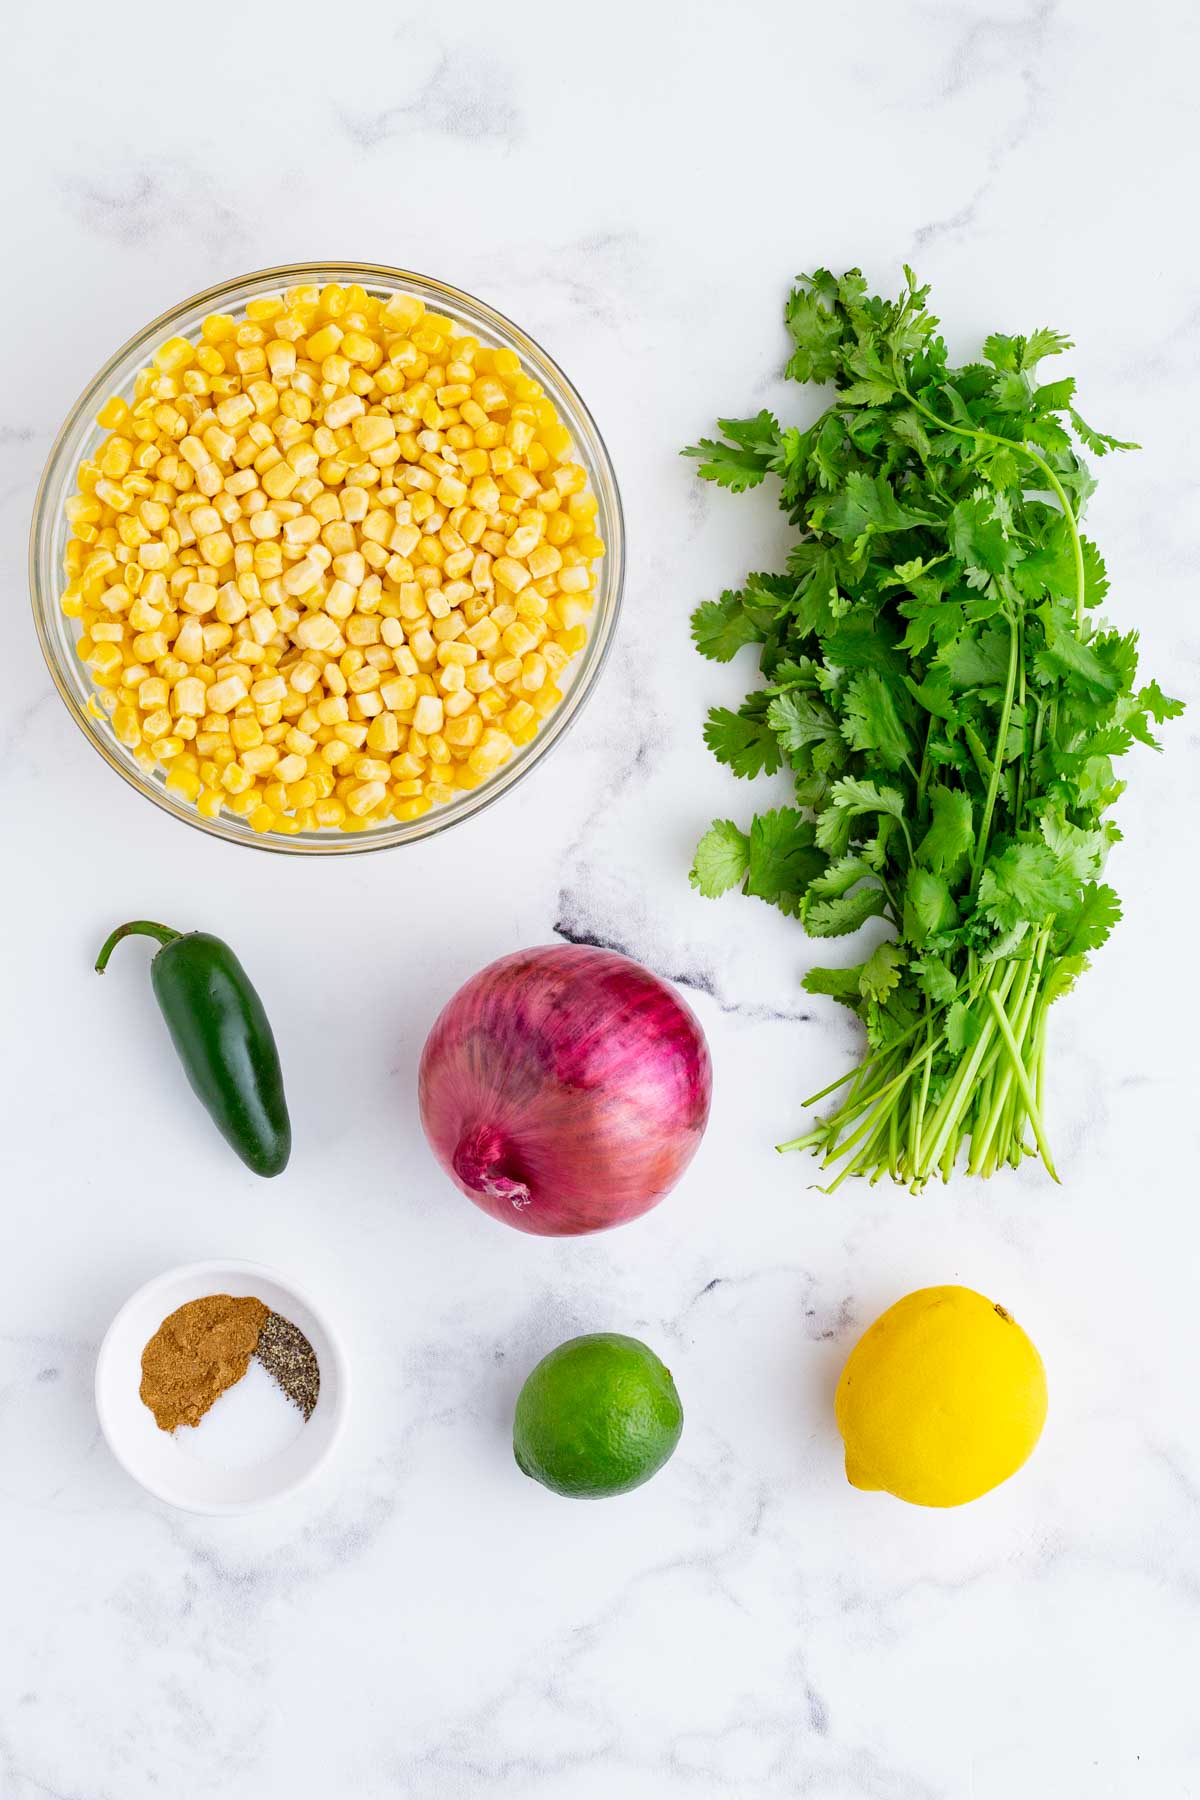 Corn, cilantro, onion, lemon, lime, and seasonings are the ingredients for this dish.